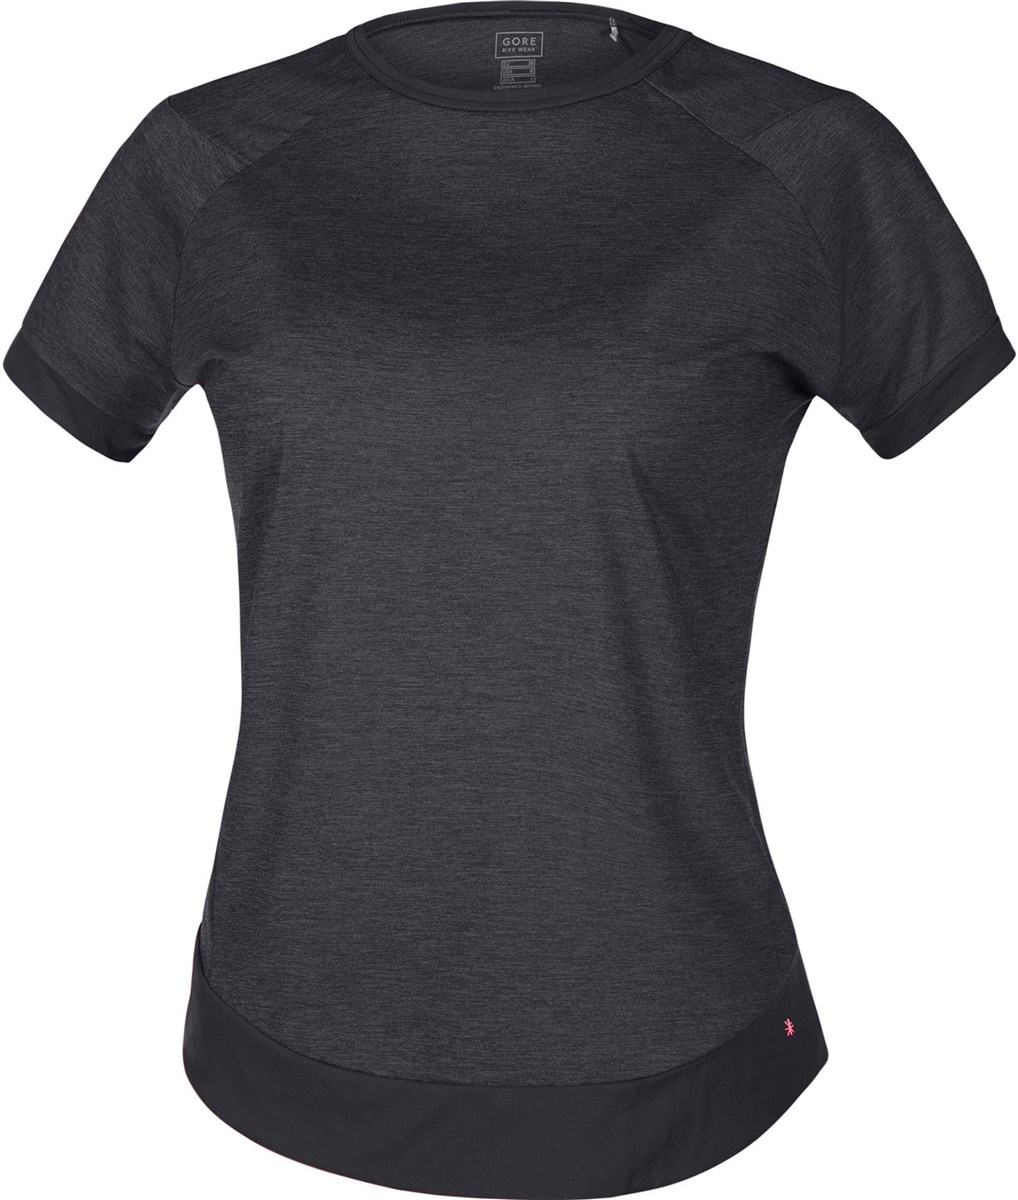 Gore Power Trail Womens Short Sleeve Jersey AW17 product image